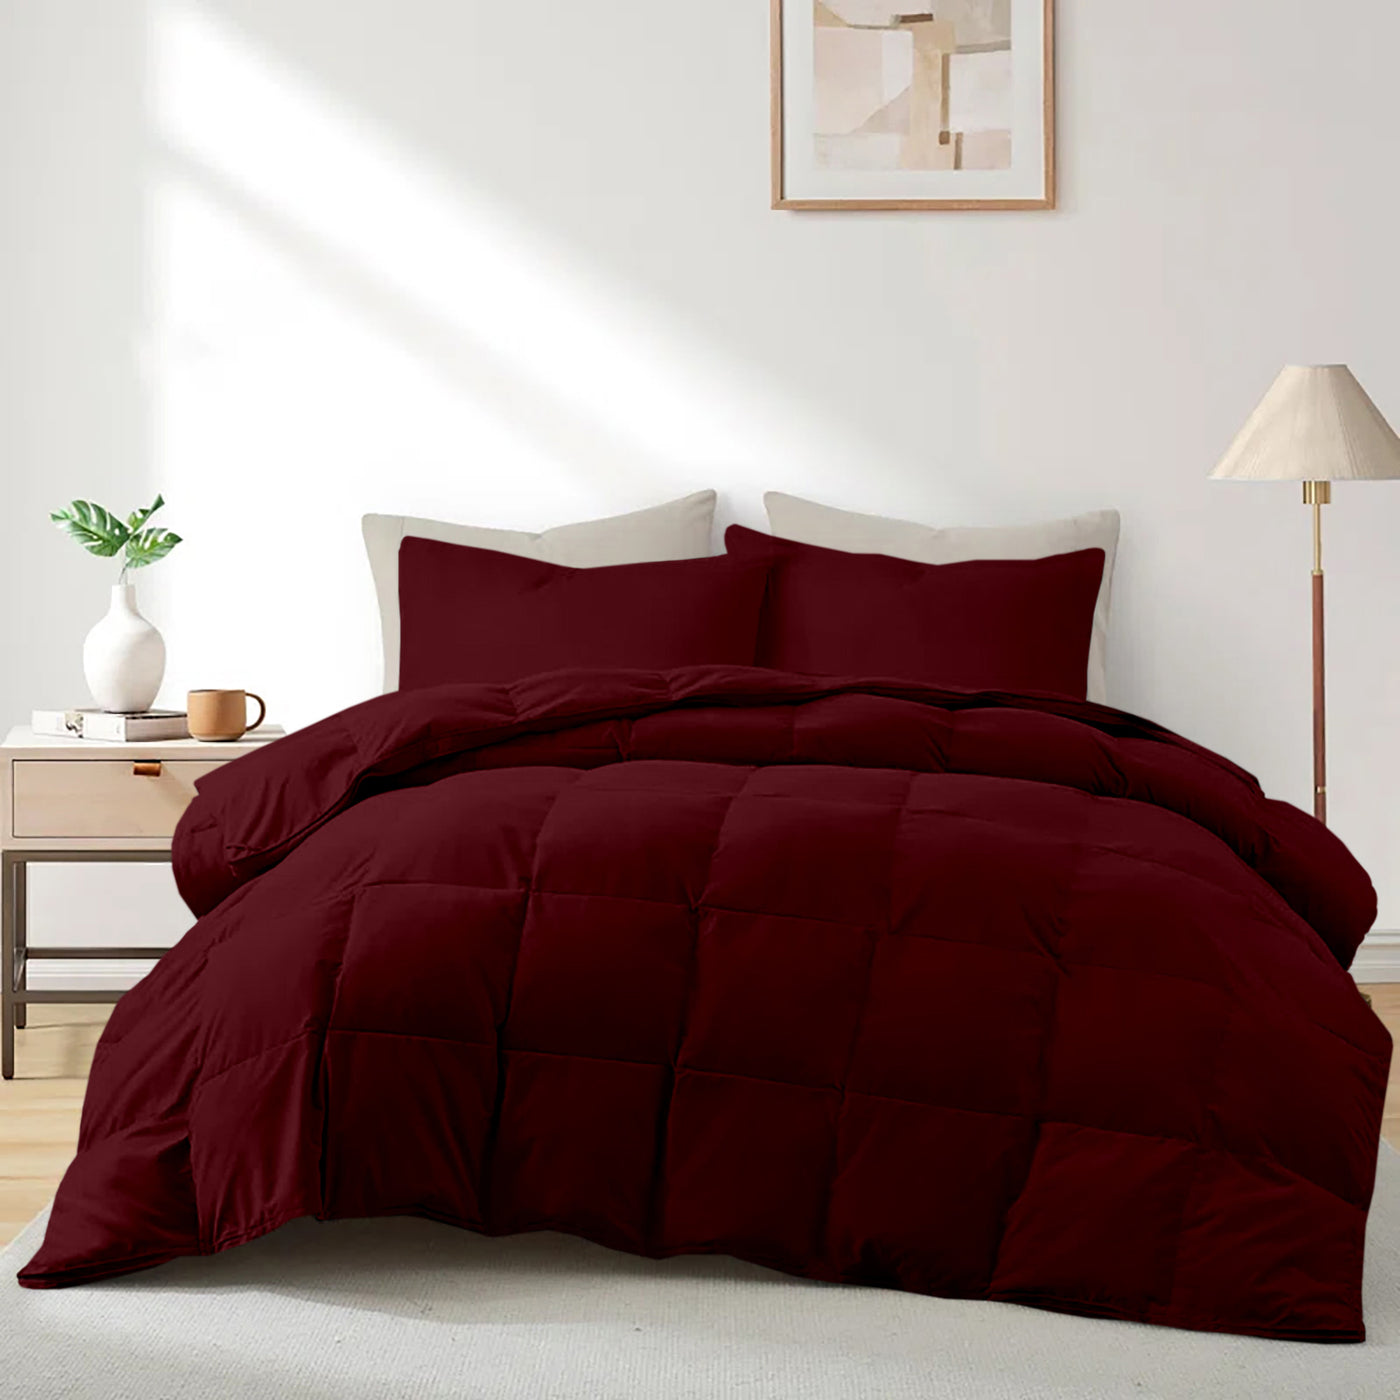 Down Alternative Quilt With Microfiber Fill & 300 TC Egyptian Cotton Exterior - Burgundy